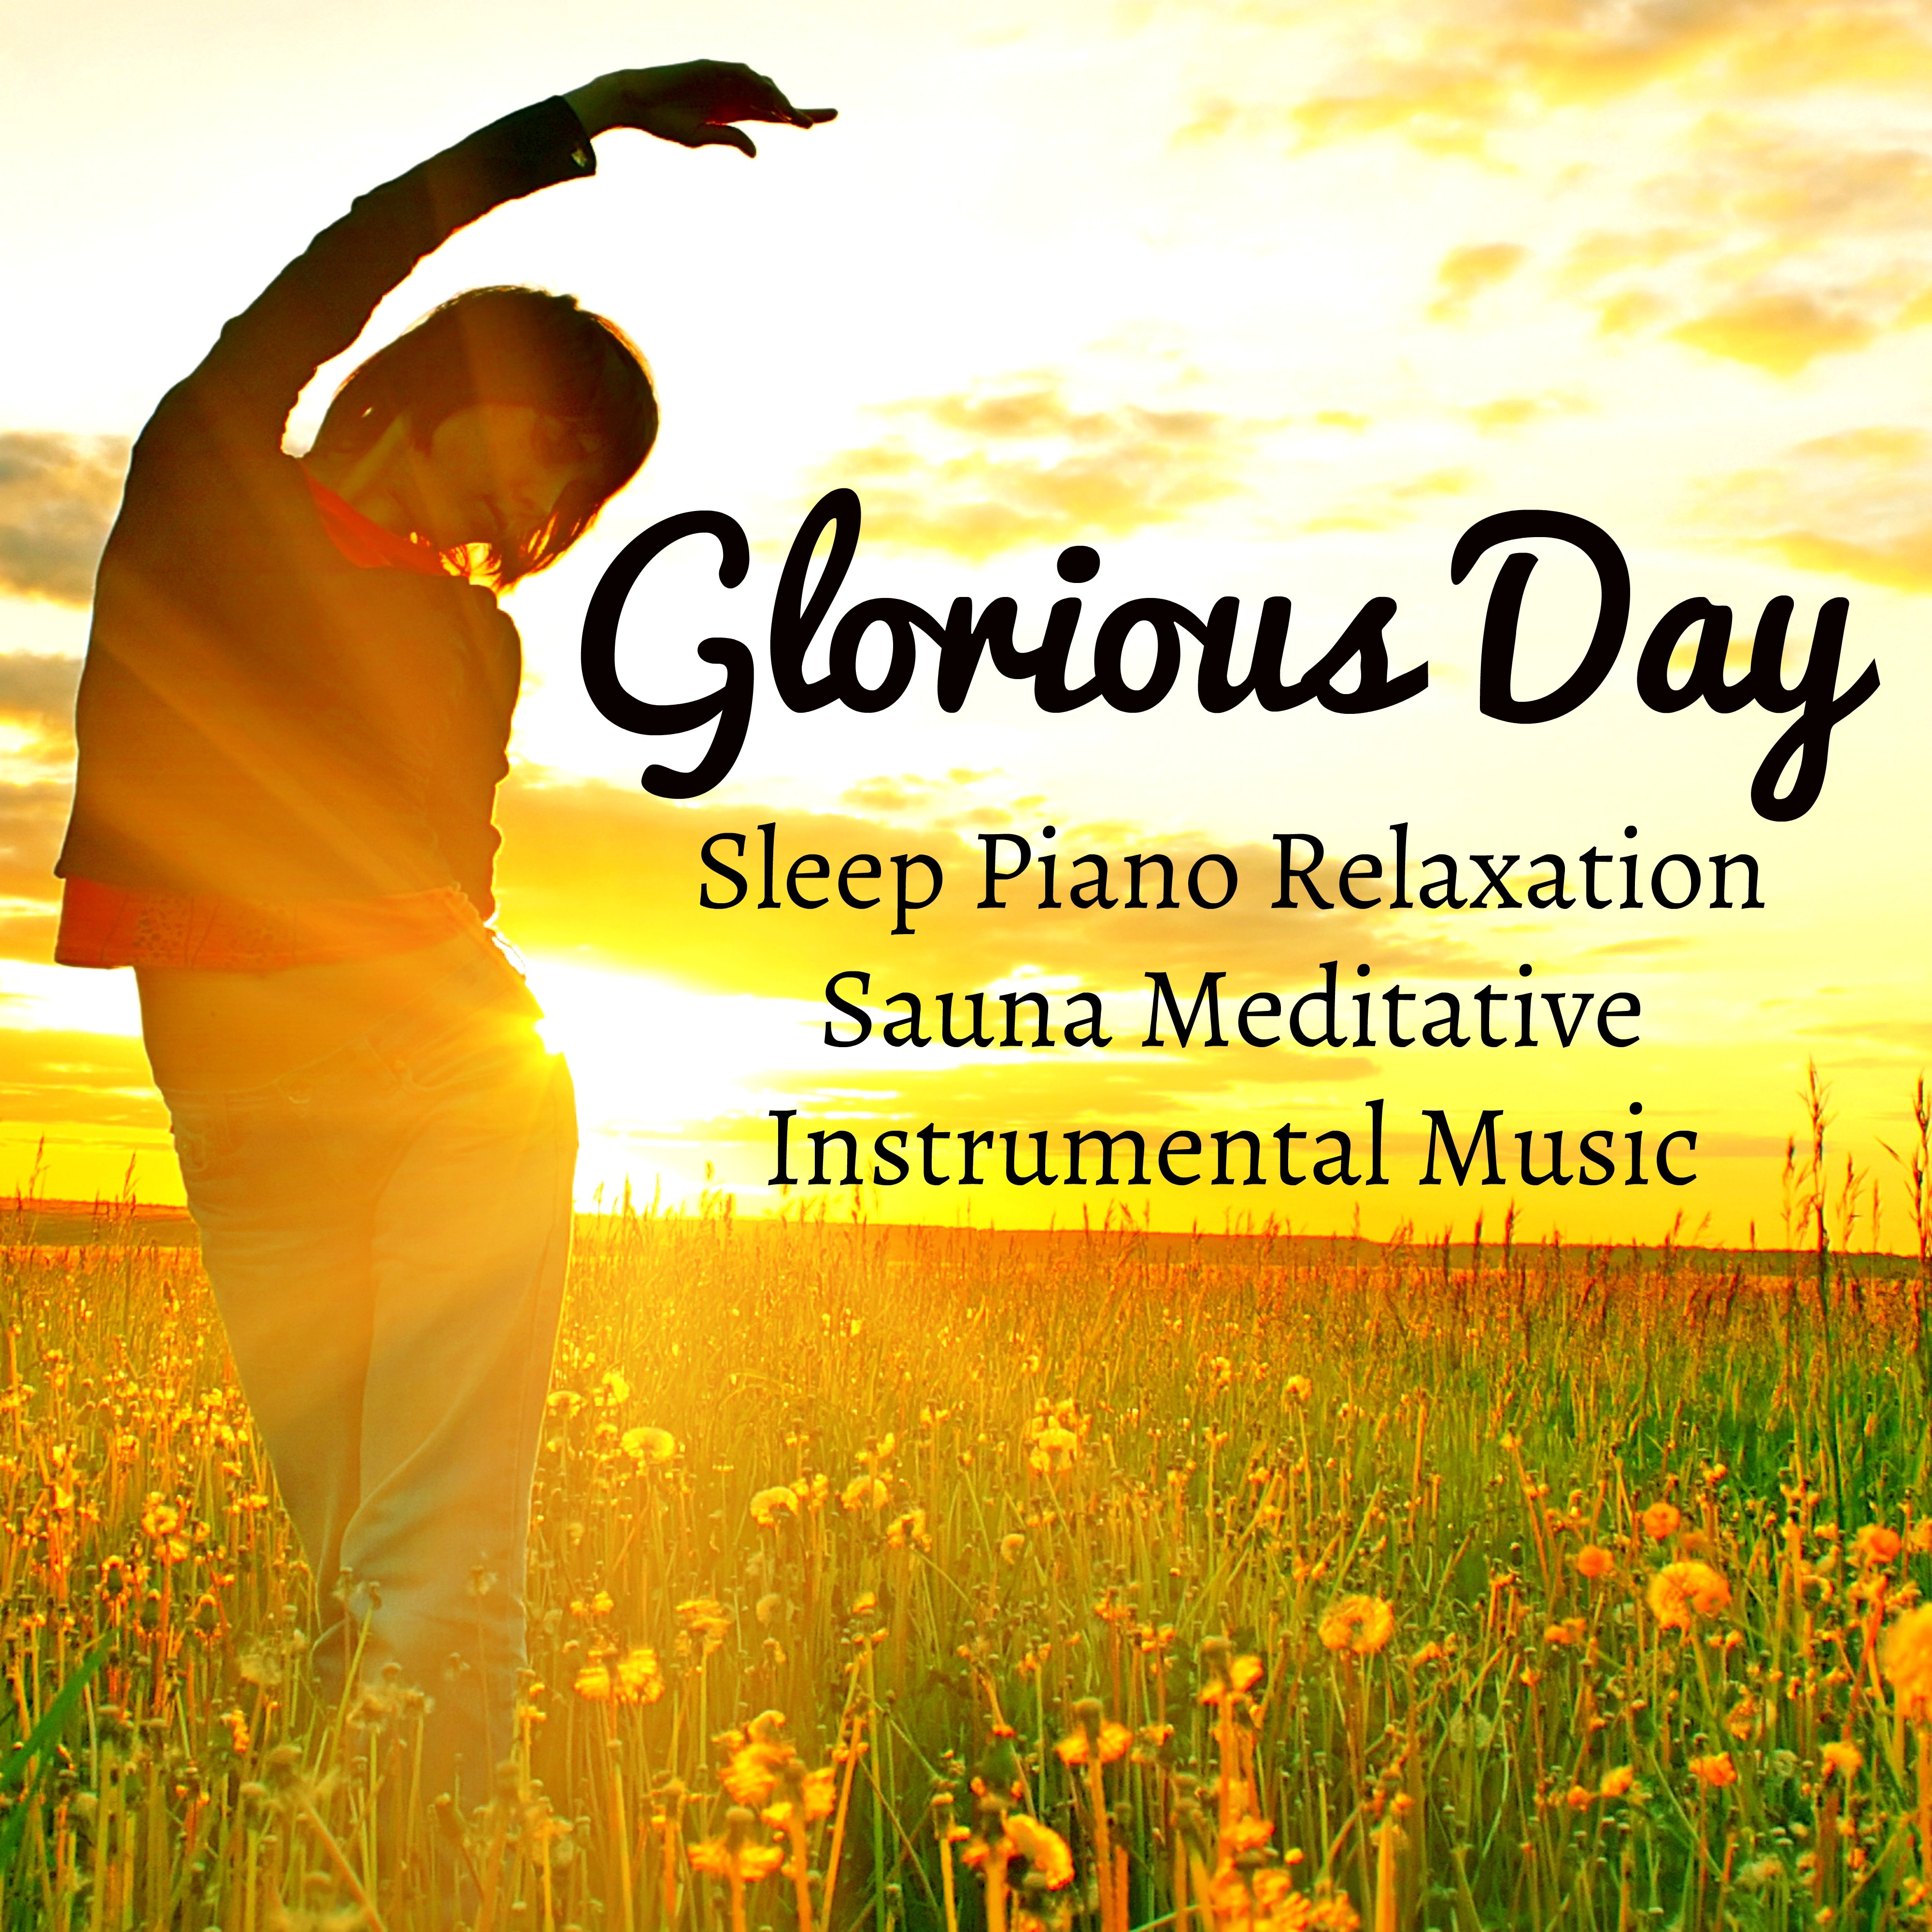 Glorious Day - Sleep Piano Relaxation Sauna Meditative Instrumental Music for Health Wellbeing Brainwave Entrainment and Problem Solving